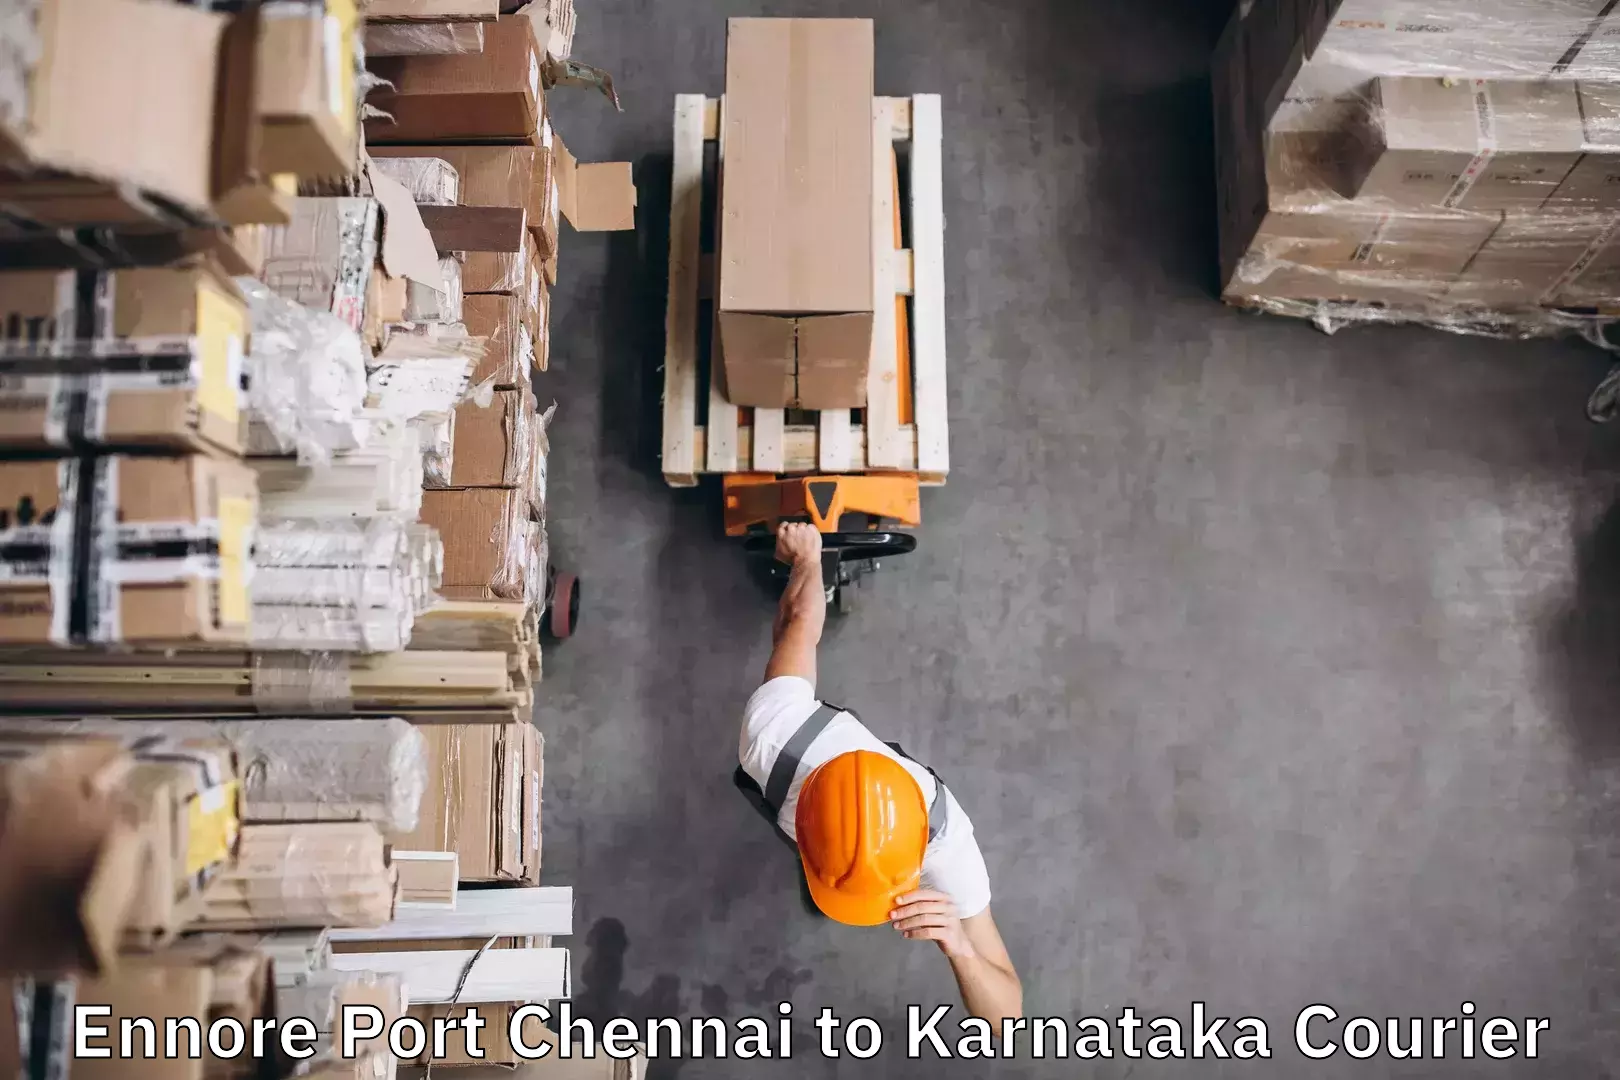 Door-to-door baggage service Ennore Port Chennai to Channapatna